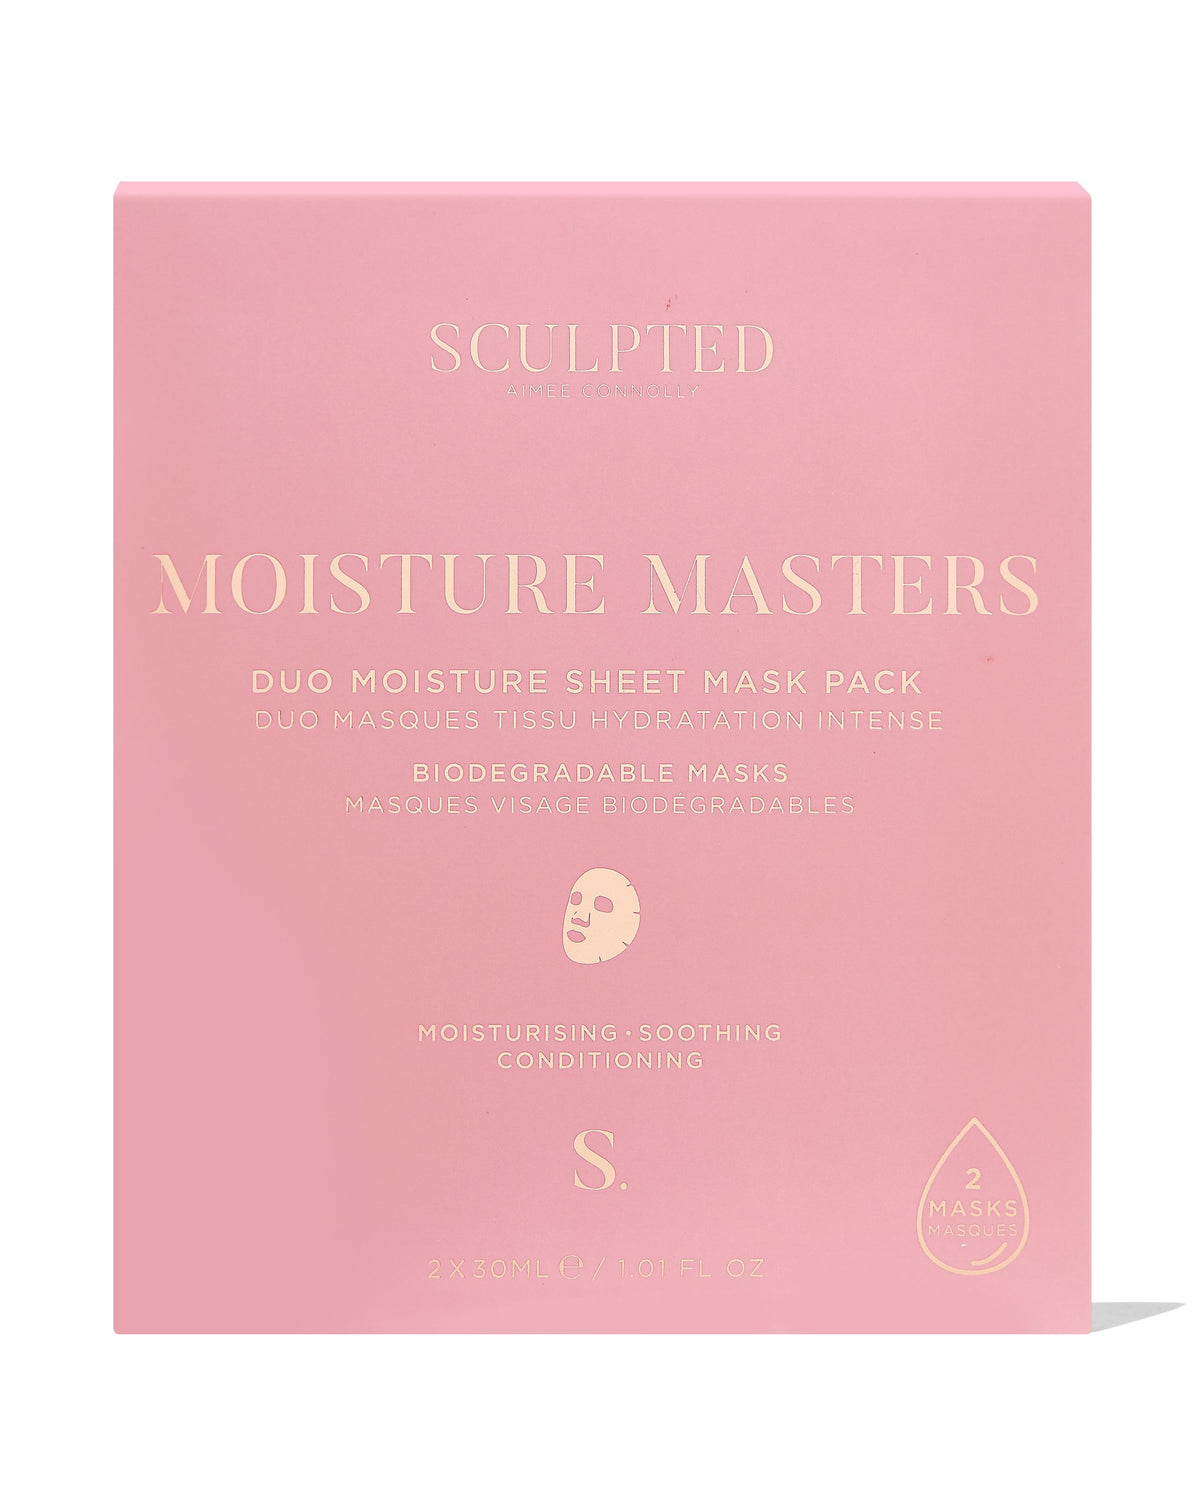 Sculpted moisture masters